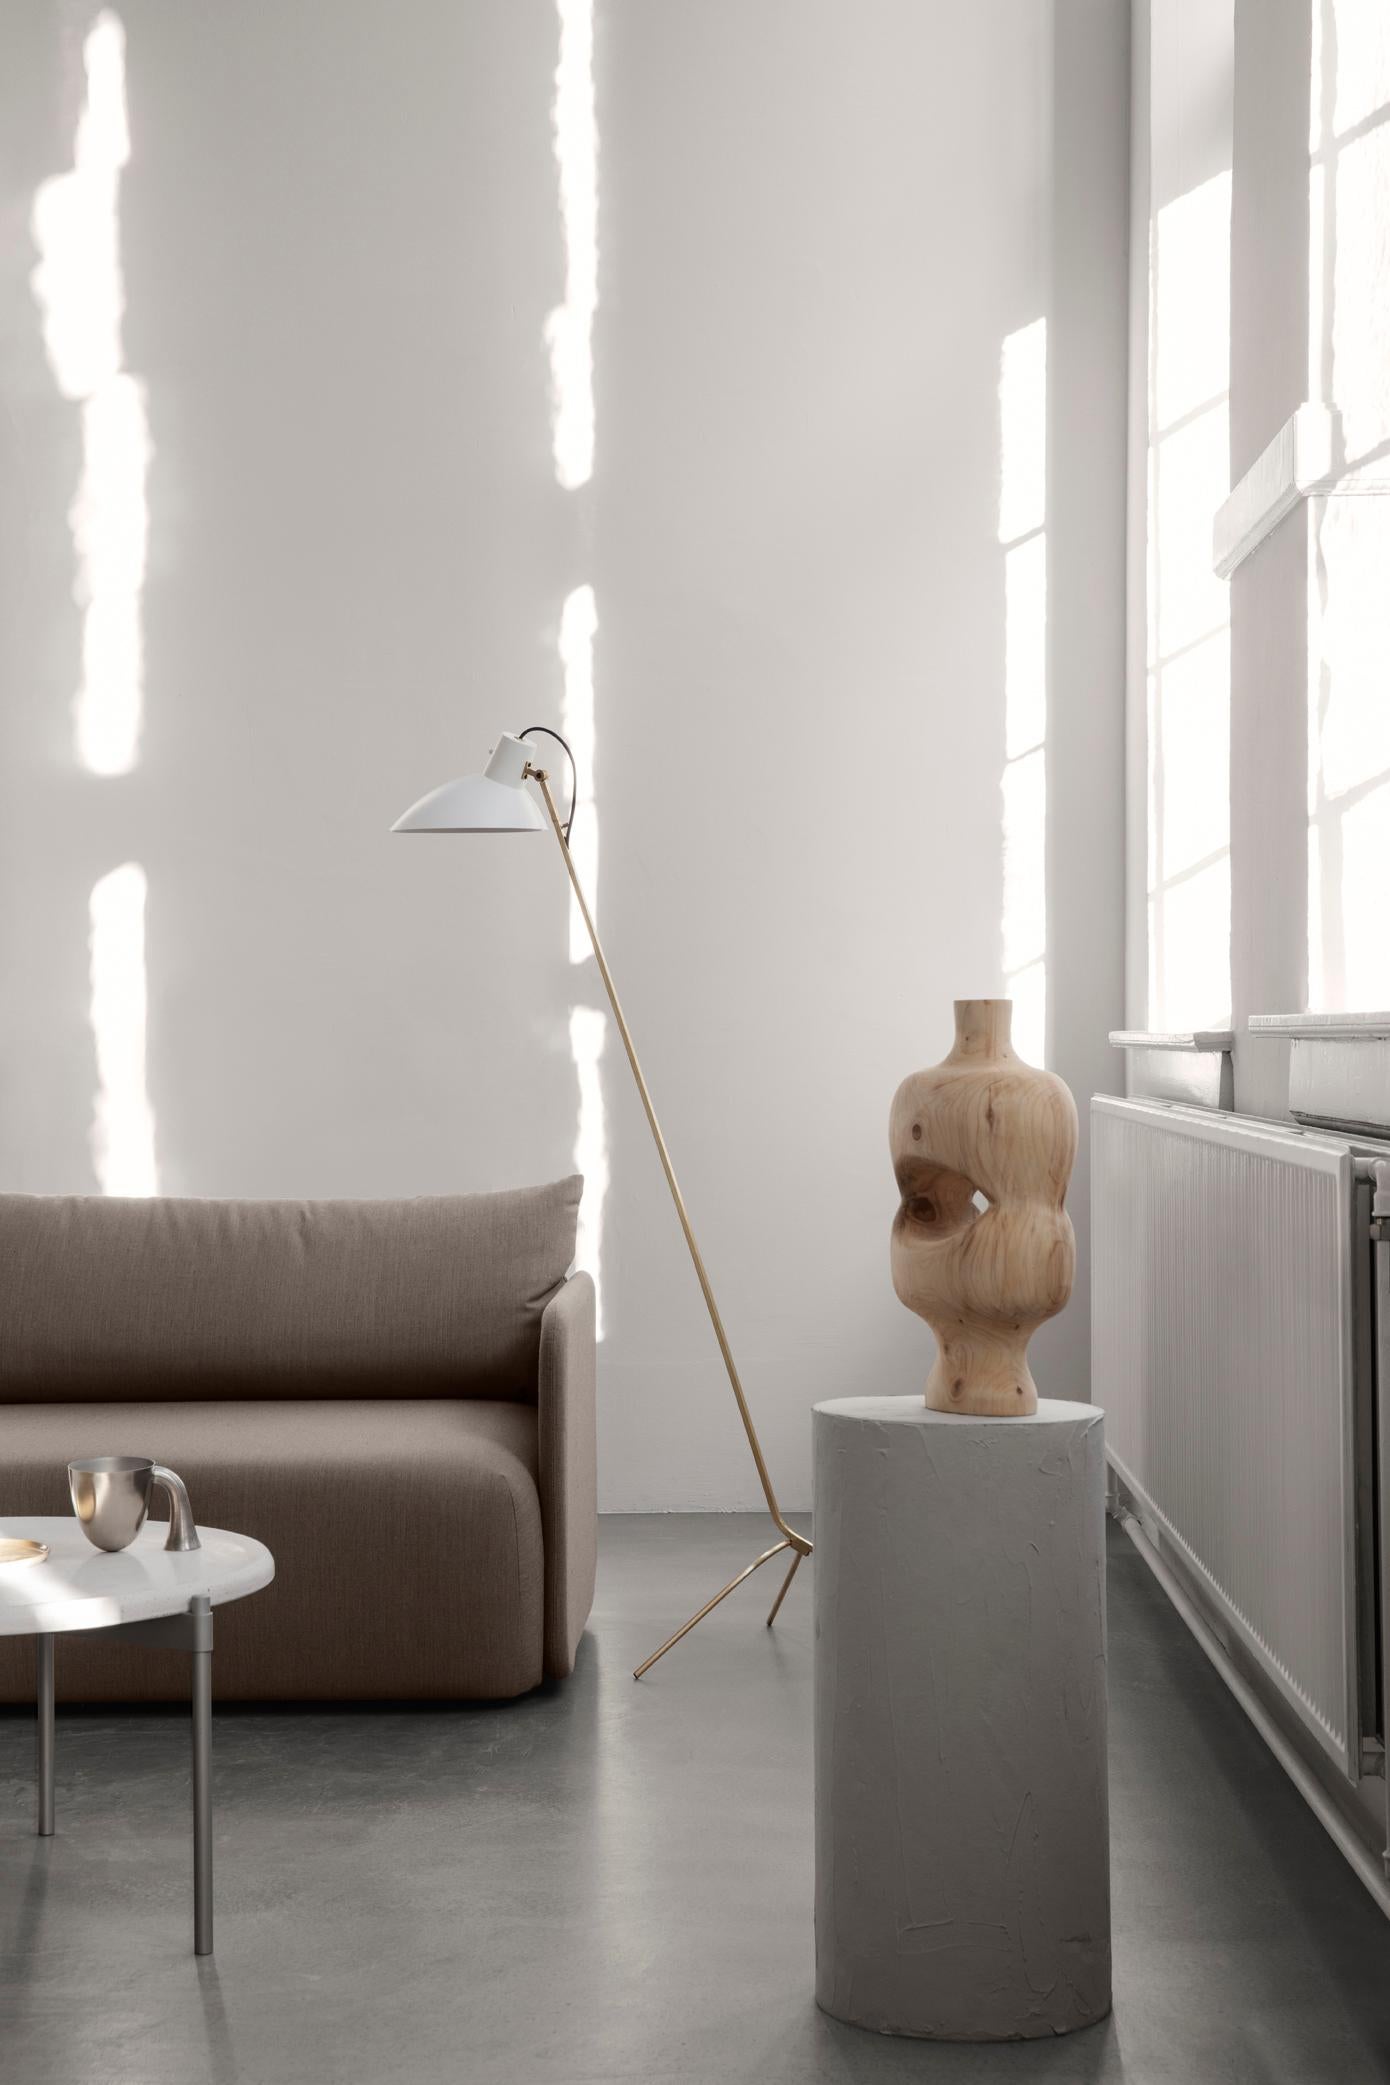 VV Cinquanta White and Brass Floor Lamp Designed by Vittoriano Viganò for Astep 12